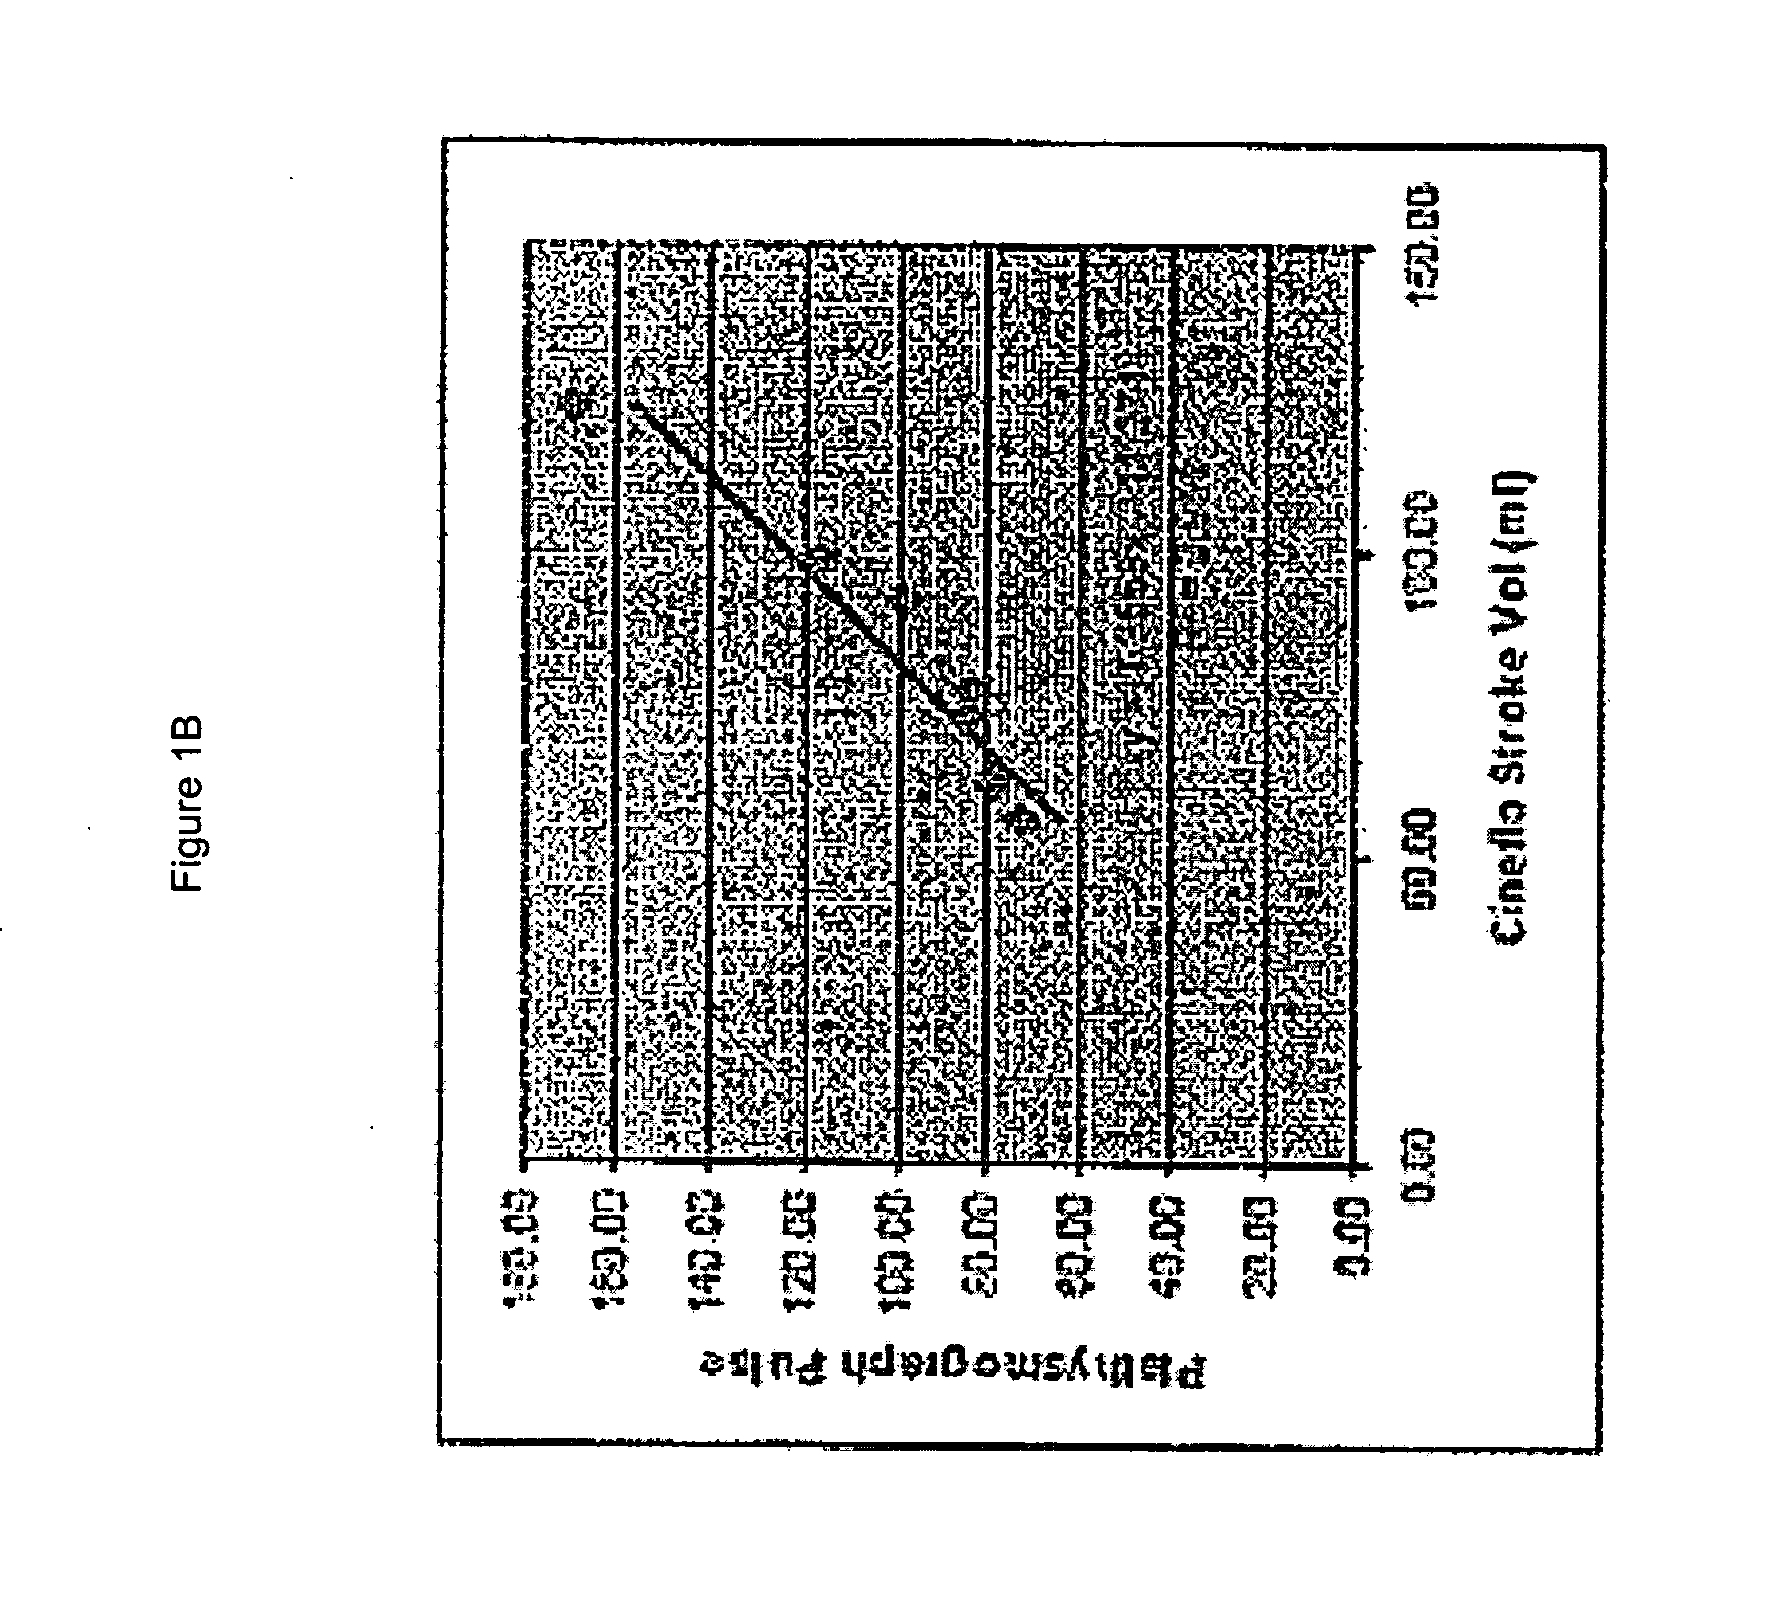 Device and system that identifies cardiovascular insufficiency